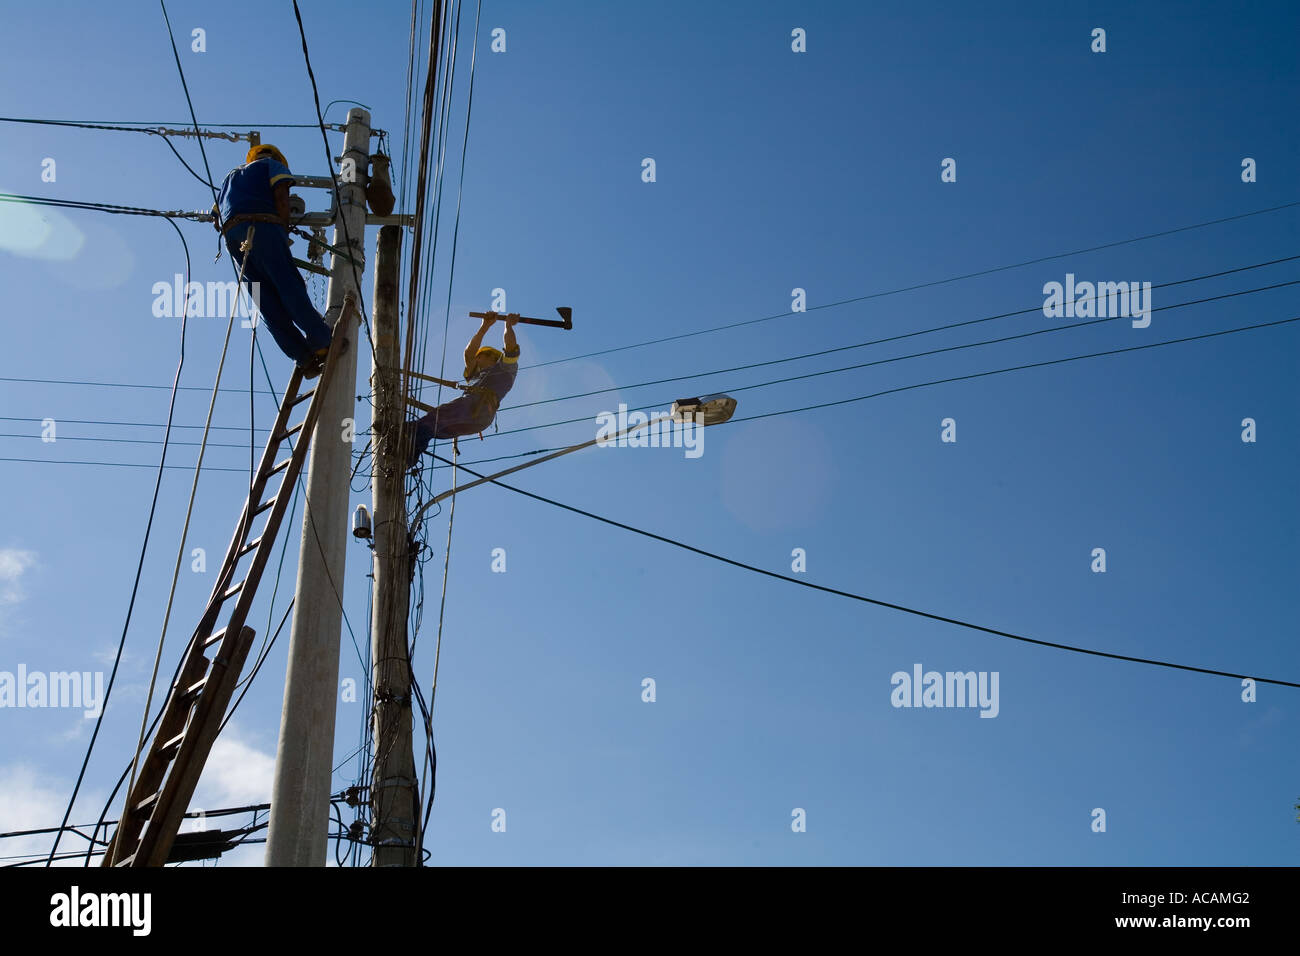 Engineer work a man is cutting down an electricity post with an axe Paraty Rio de Janeiro state Brazil Stock Photo